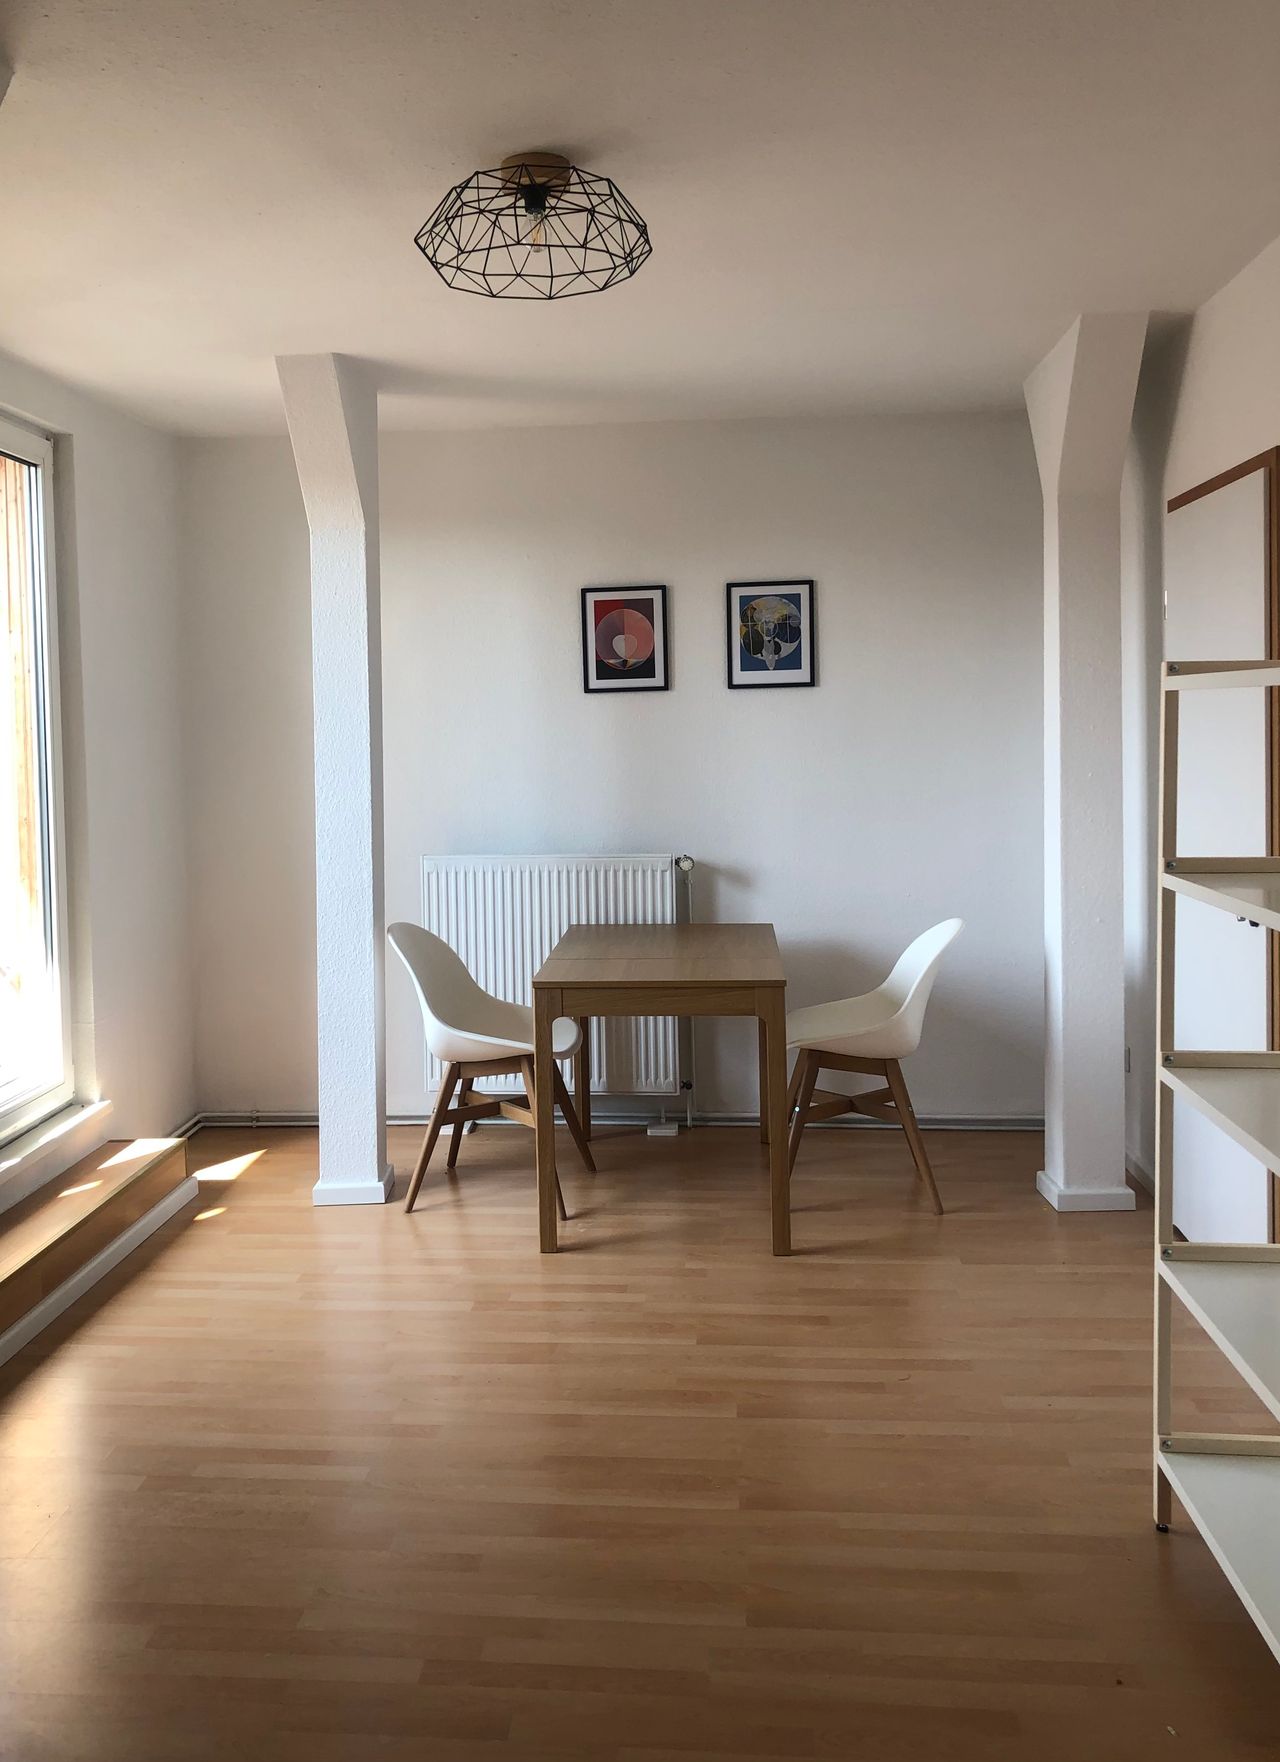 Modern rooftop apartment with roof terrace in the heart of vibrant, up-and-coming Neukölln.